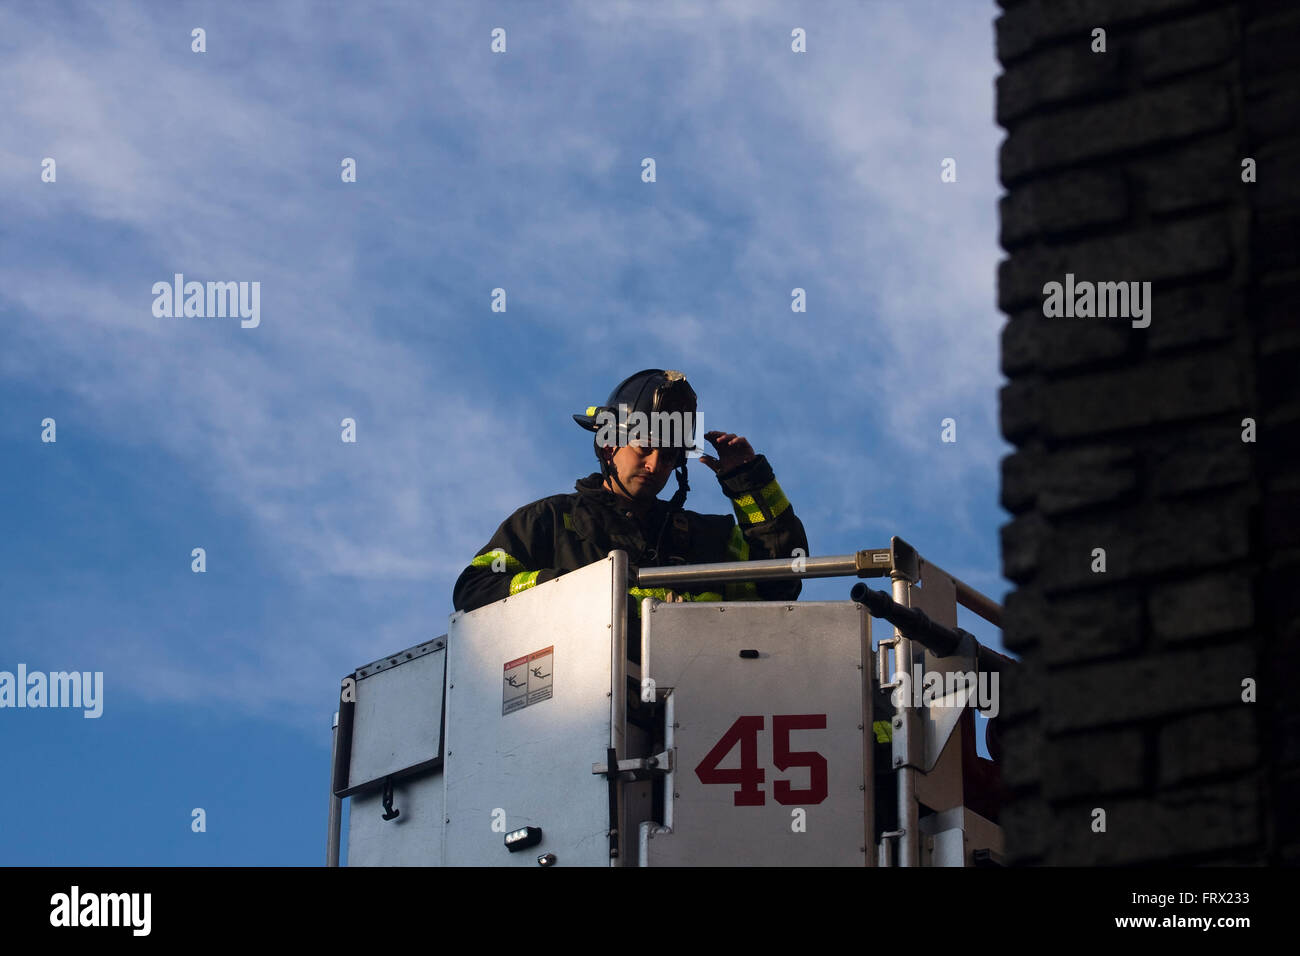 A Firemen from Engine 45 in Manhattan being lifted inside an aerial platform ladder truck's bucket whilst responding to a call Stock Photo